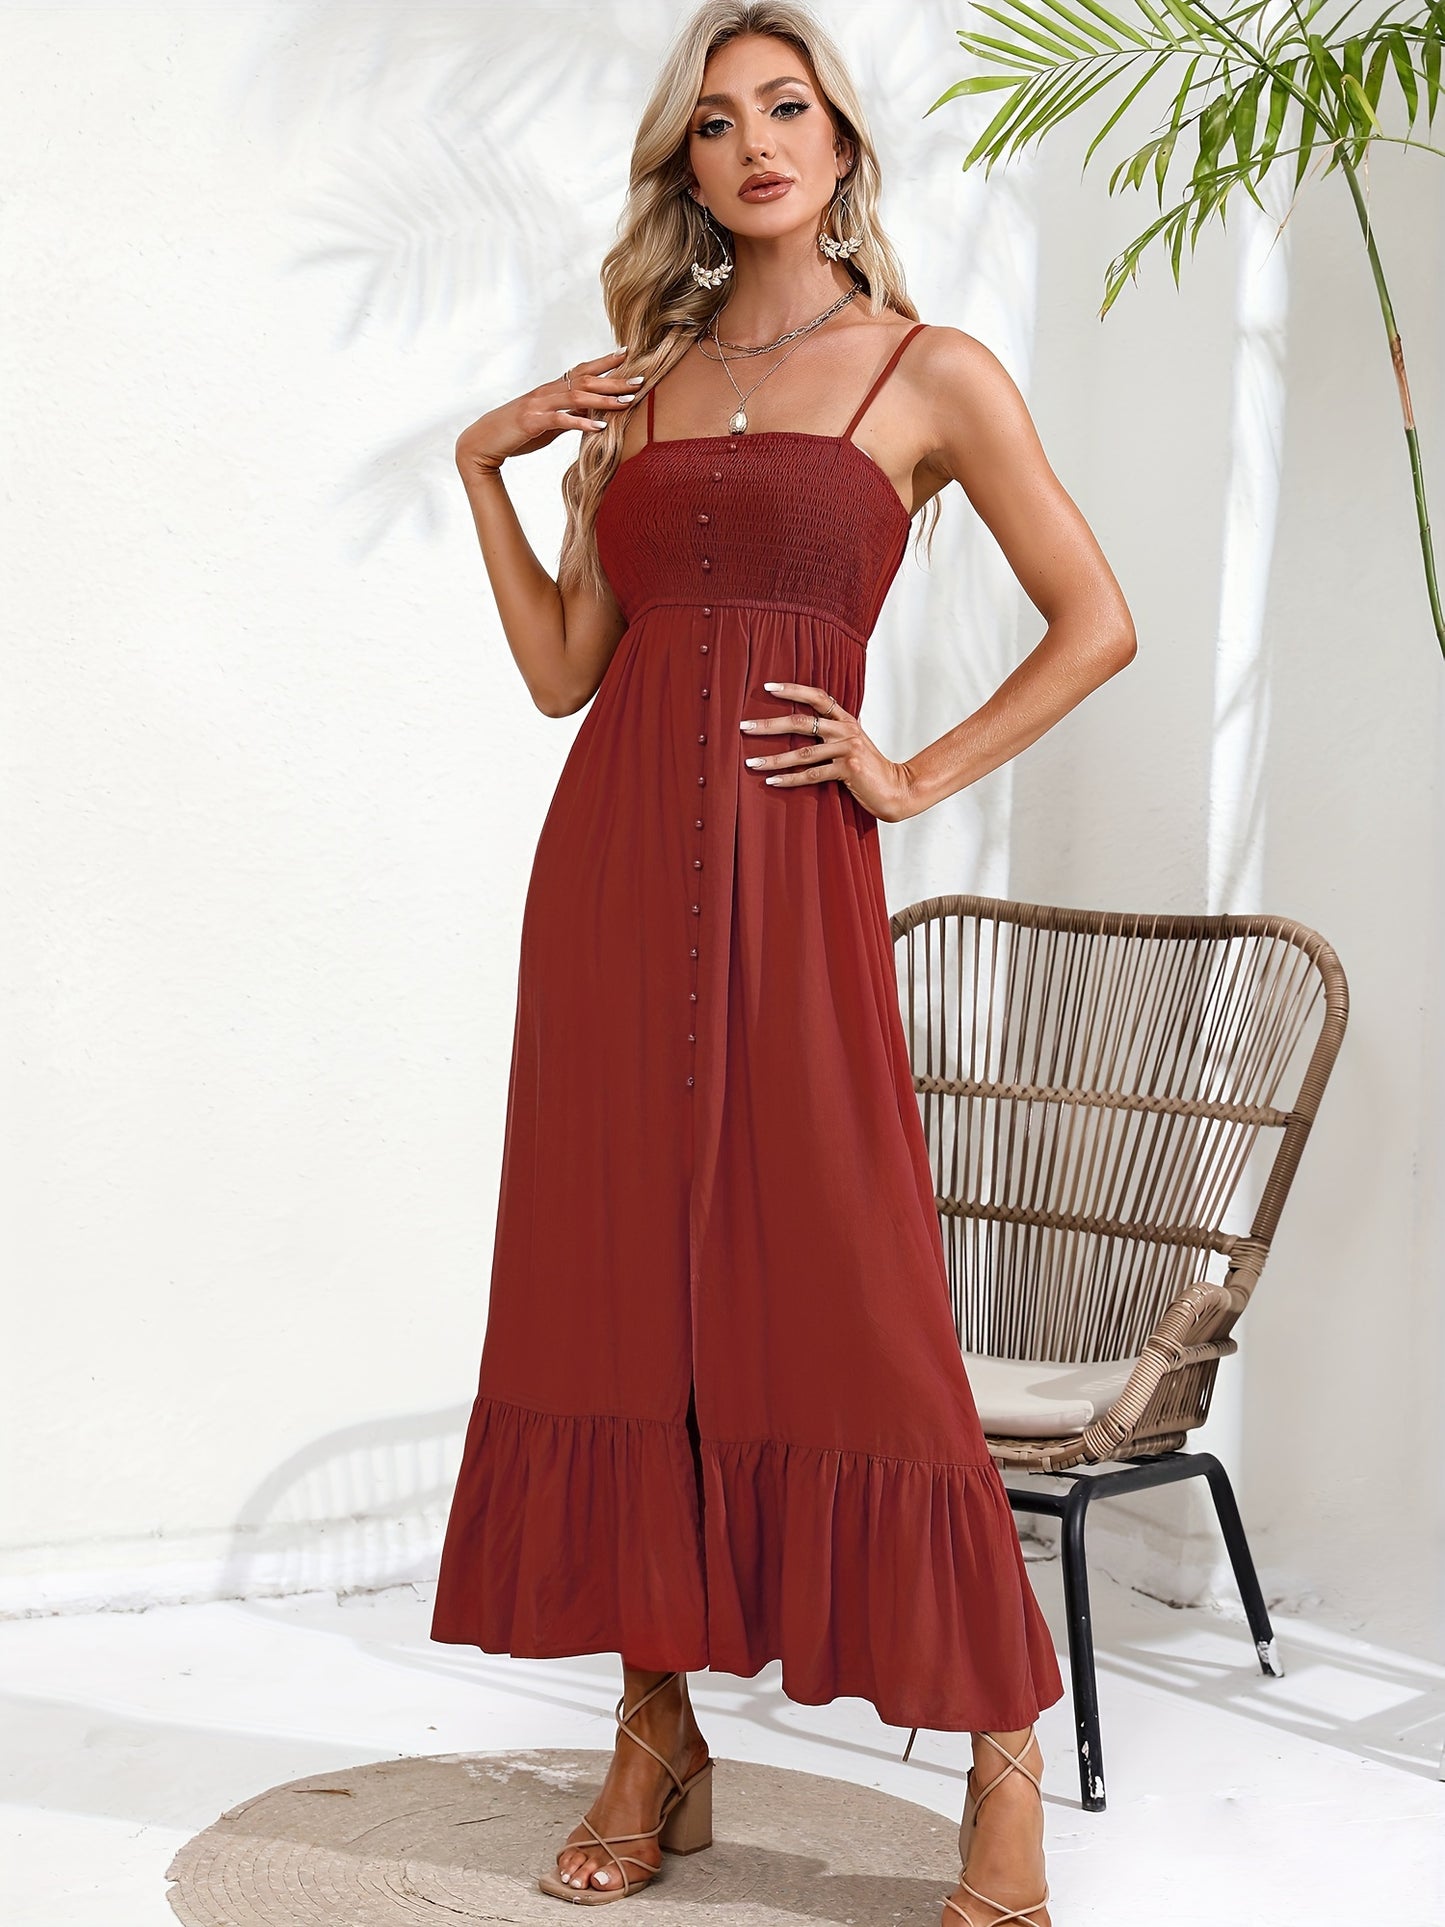 Bohemian Solid Color Spaghetti Strap Maxi Dress, Elegant Maxi Dress For Spring and Summer, Wedding Party Dress, Cocktail Party Dress